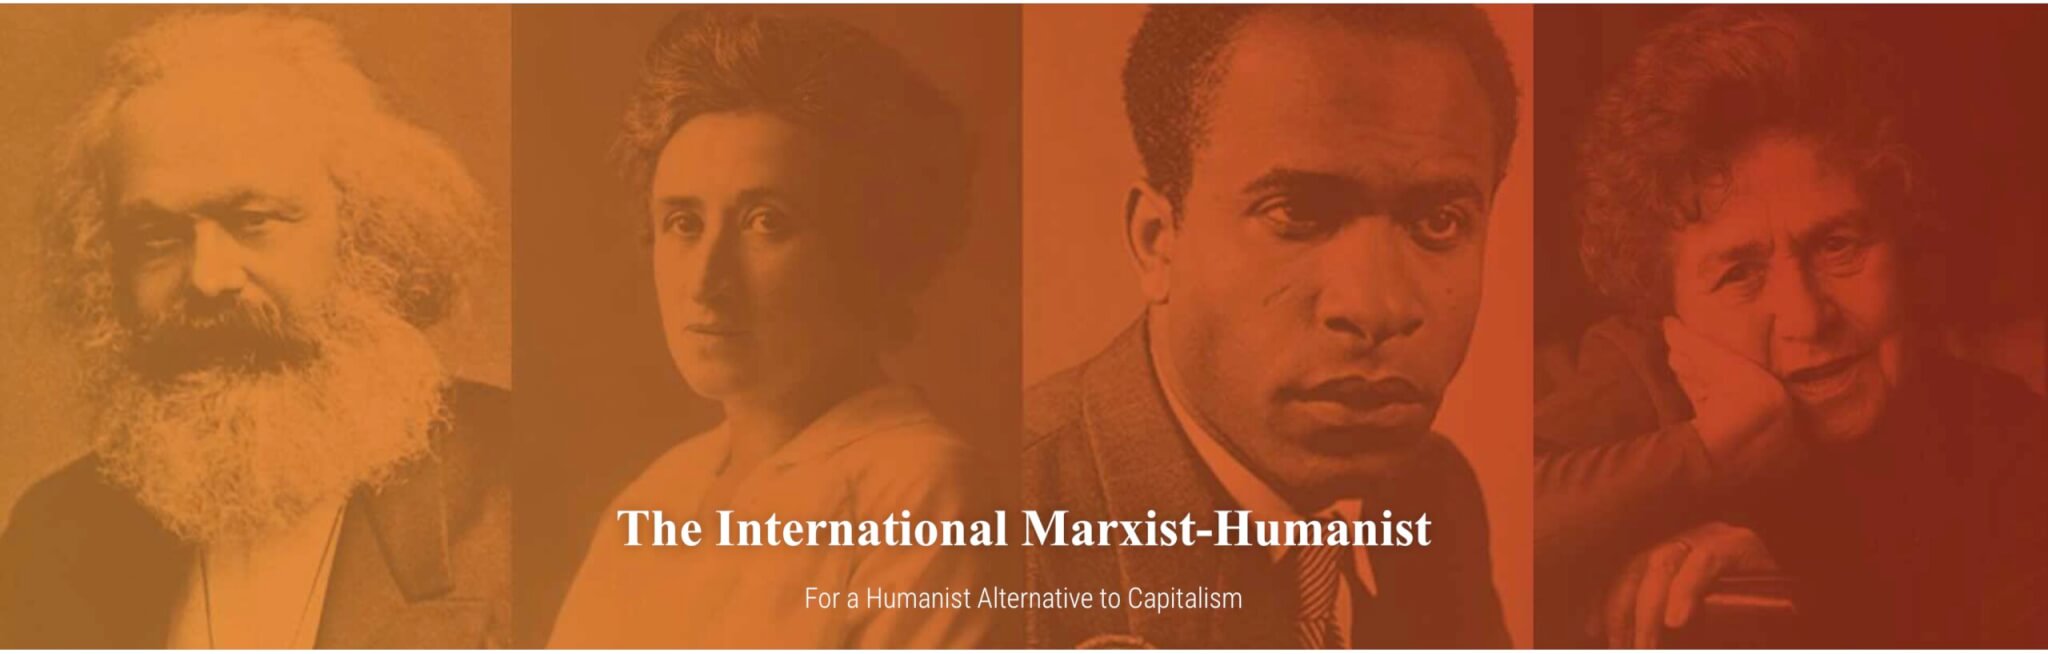 The International Marxist-Humanist
For a humanist alternative to Capitalism